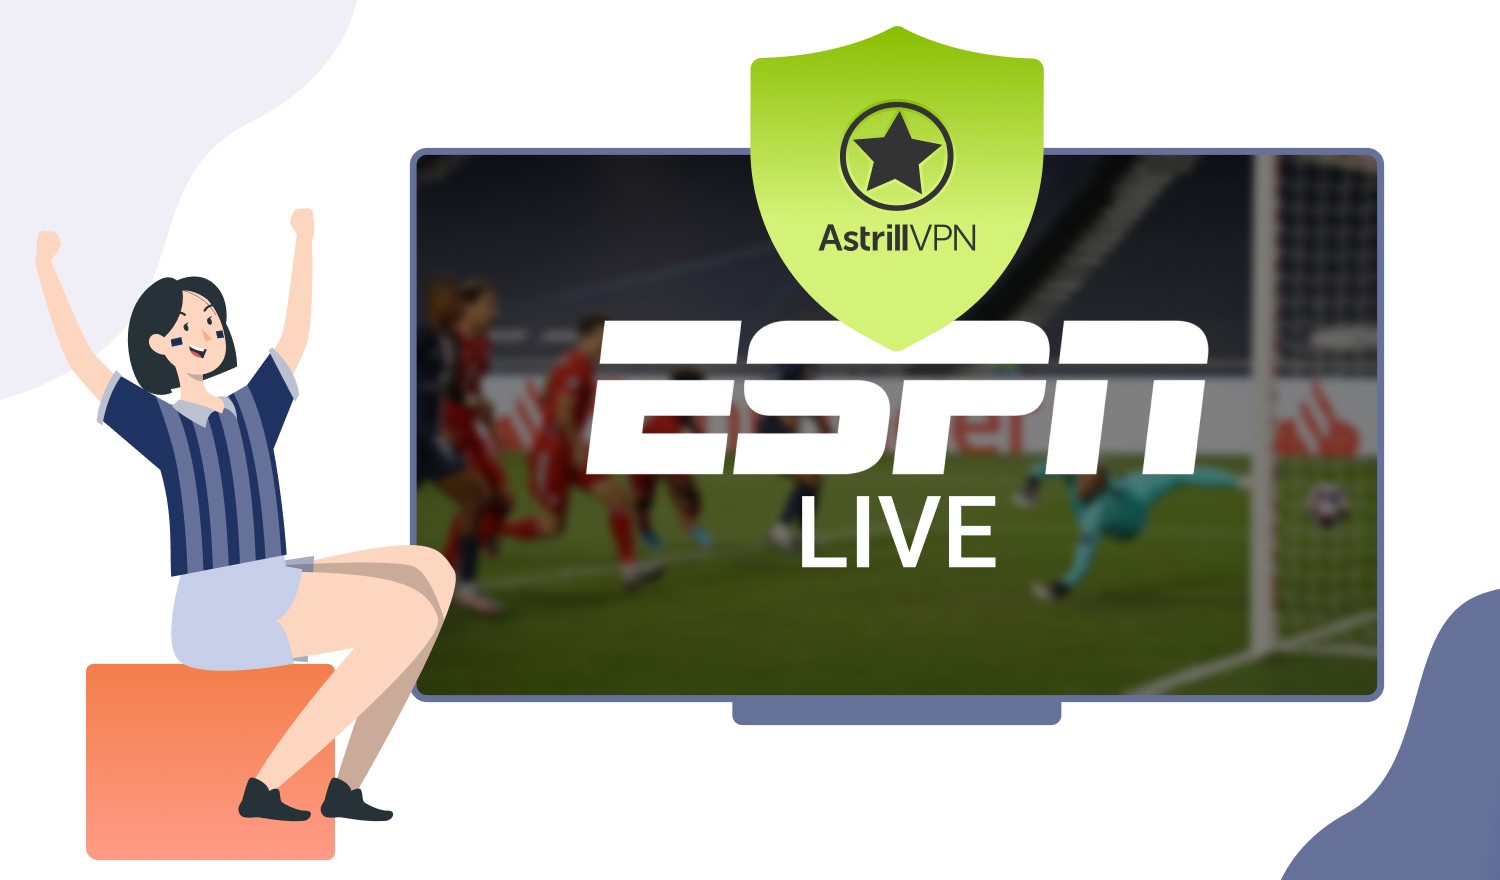 How to Watch ESPN online with a VPN?